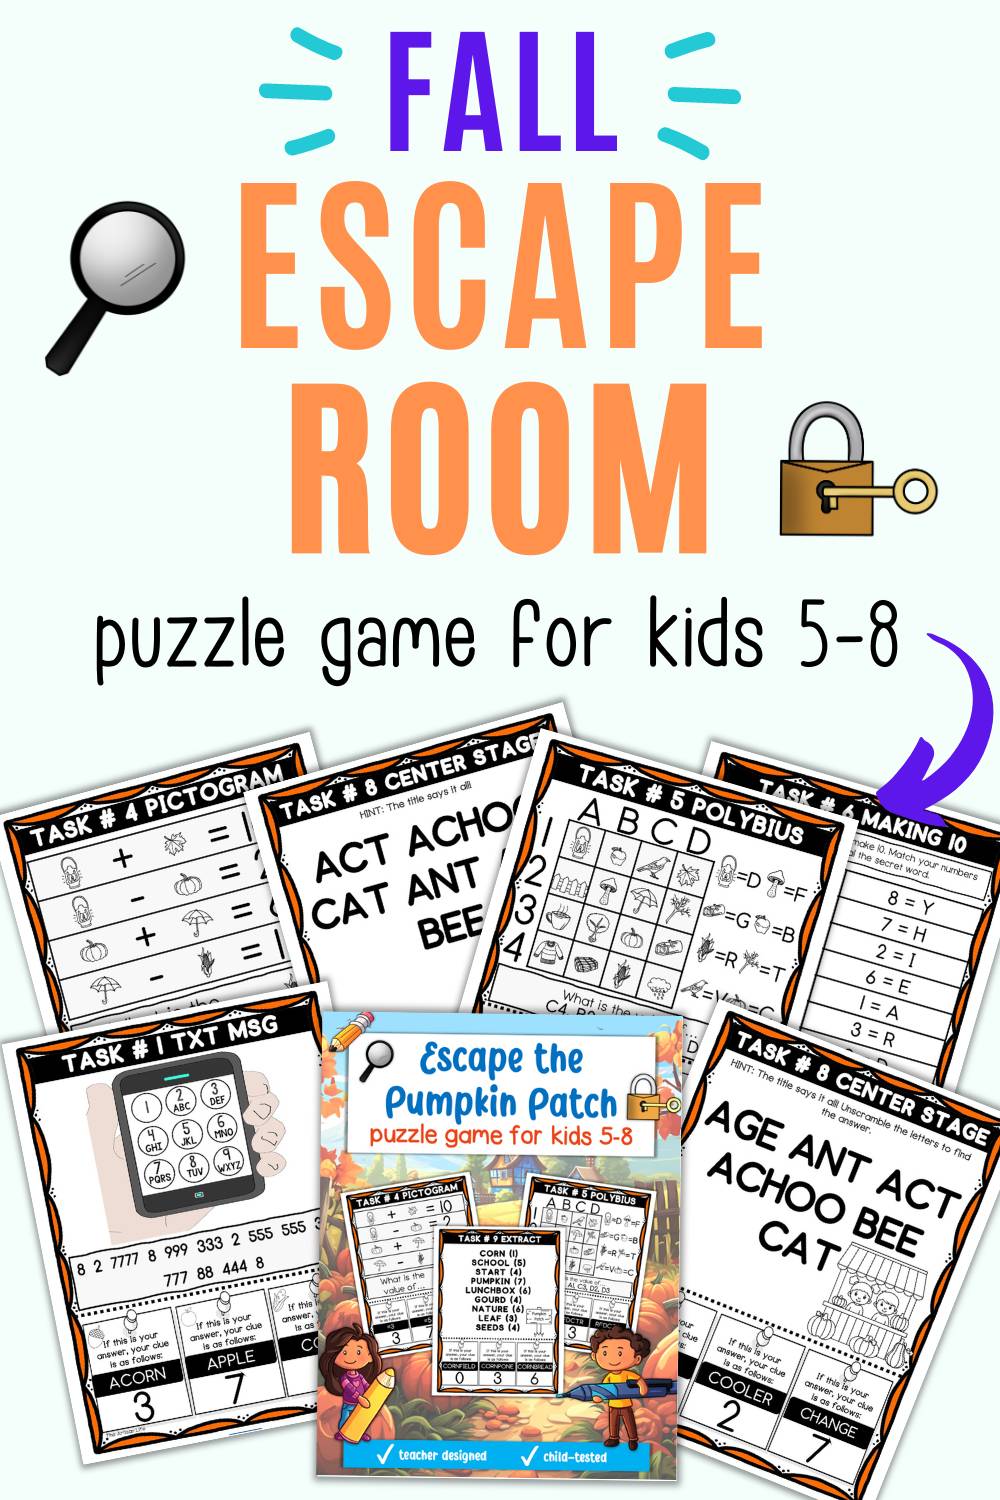 Text "fall escape room puzzle game for kids 5-8"